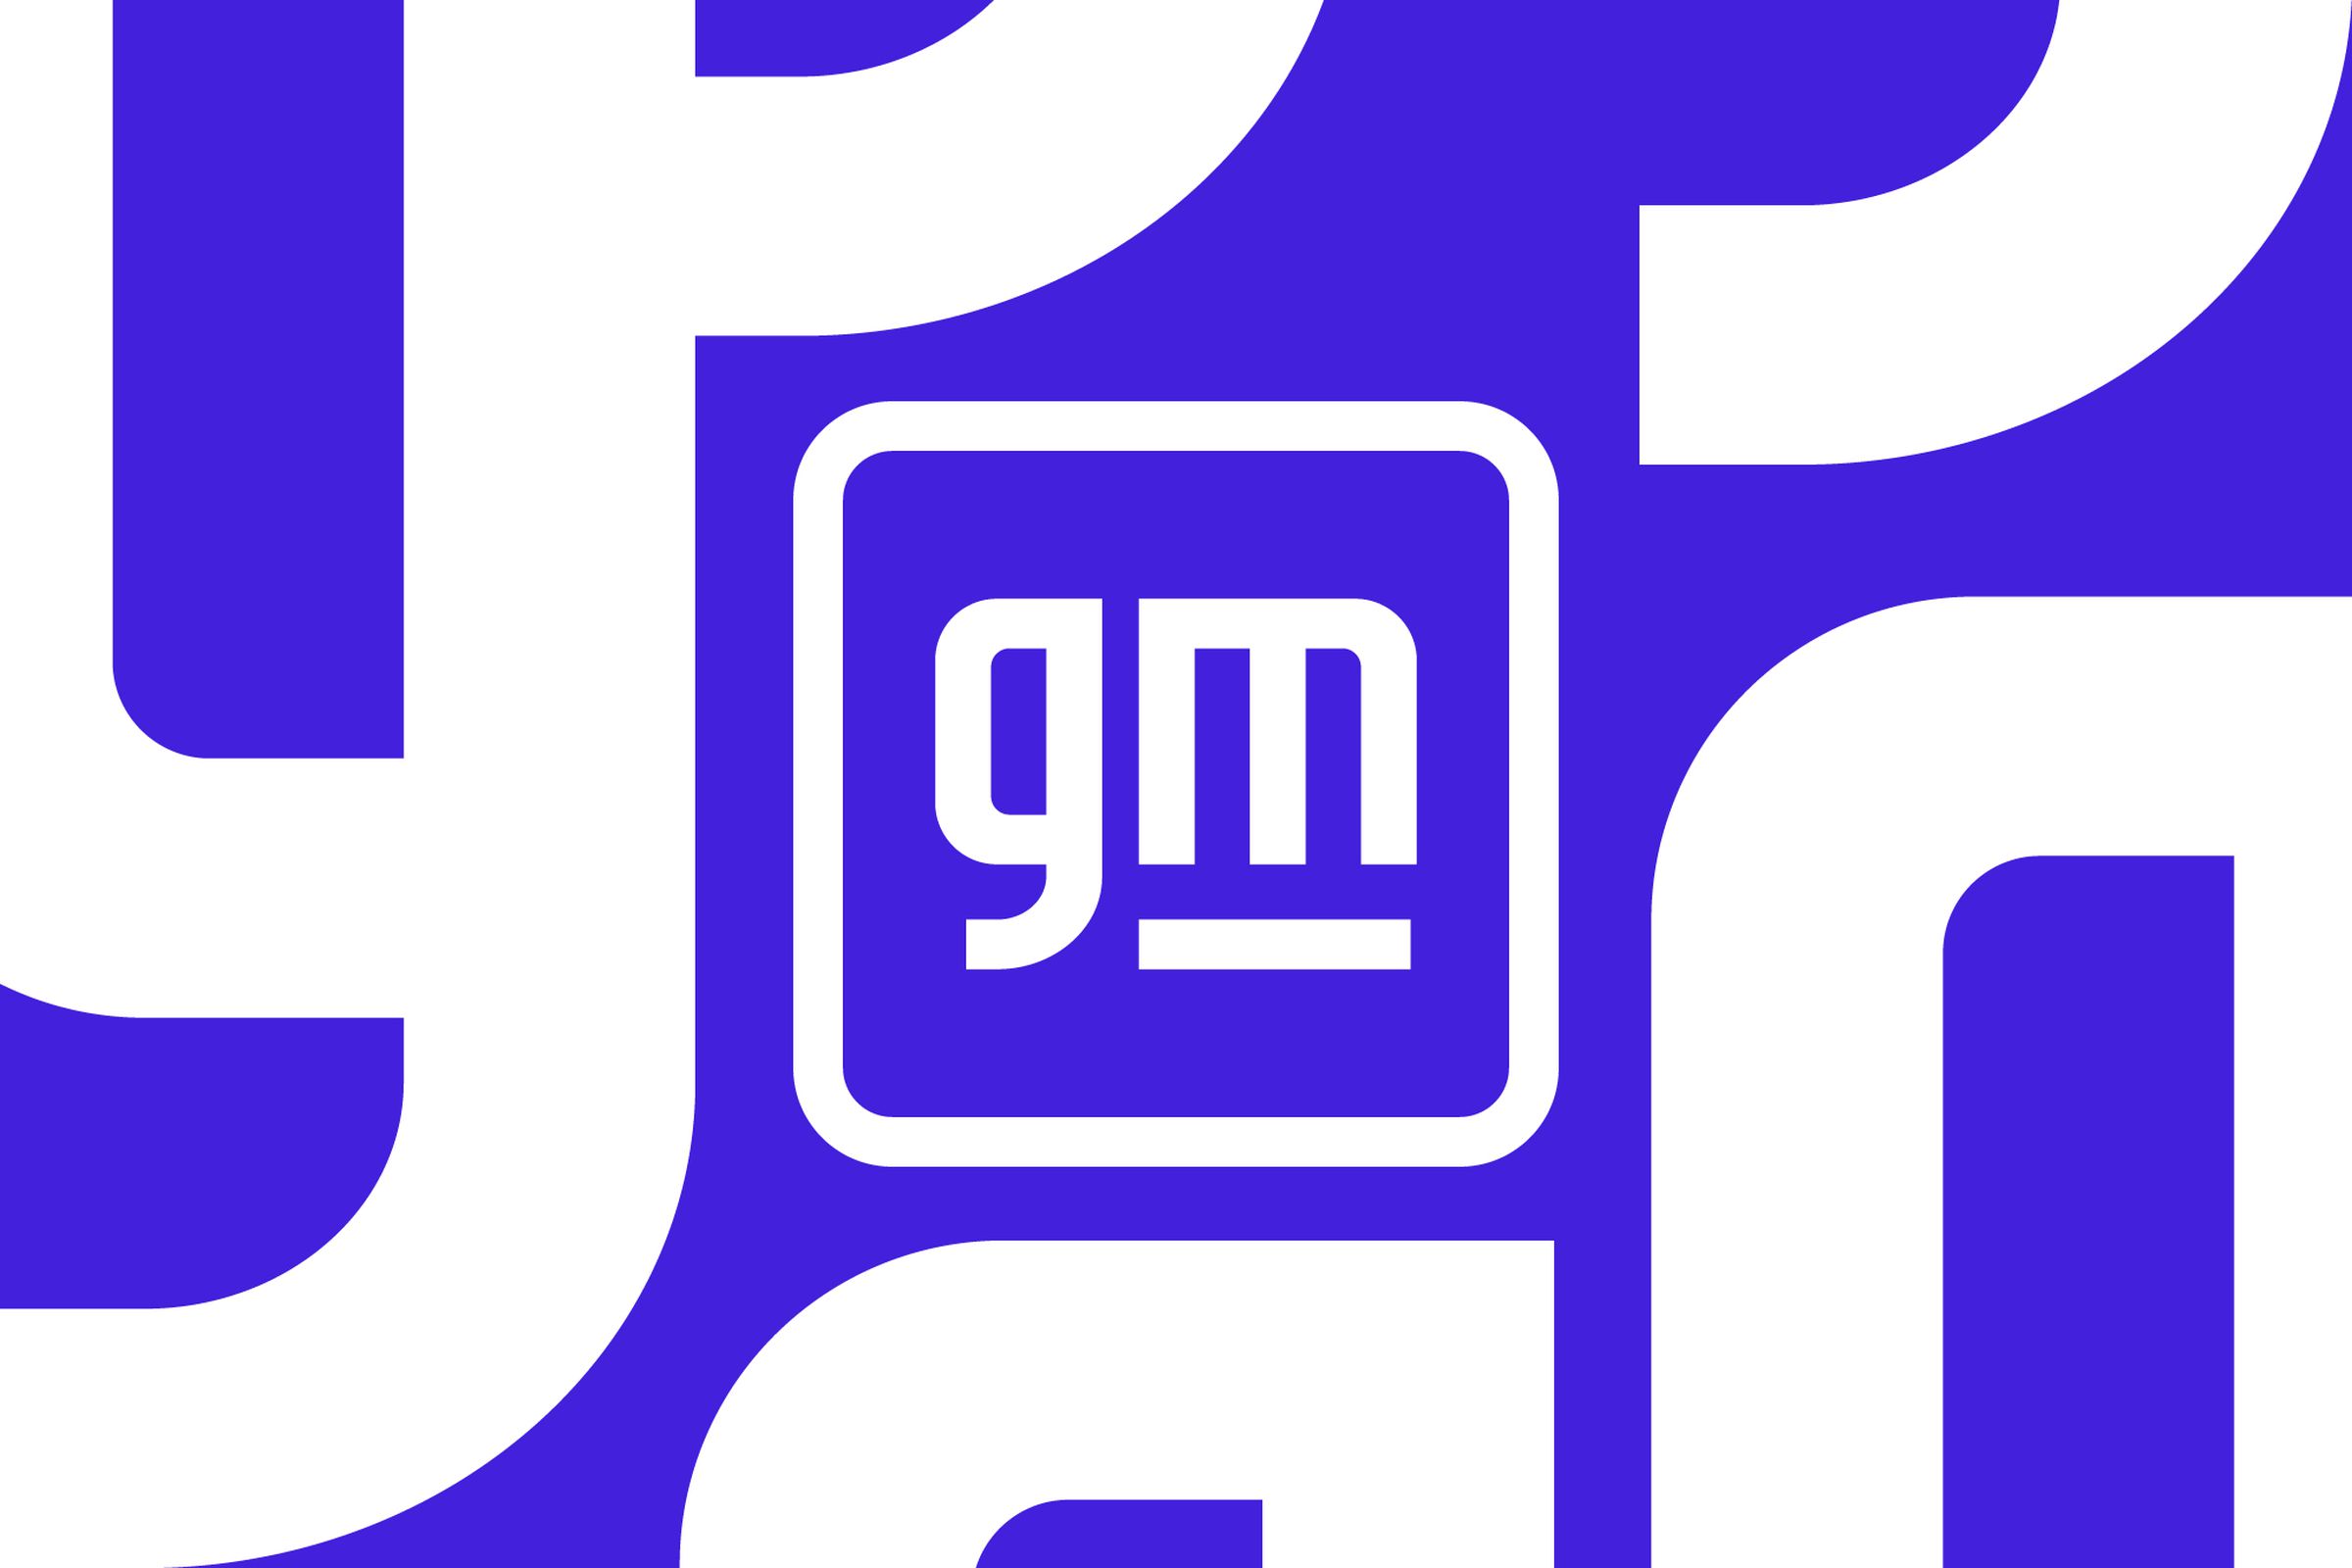 The GM logo in blue and white